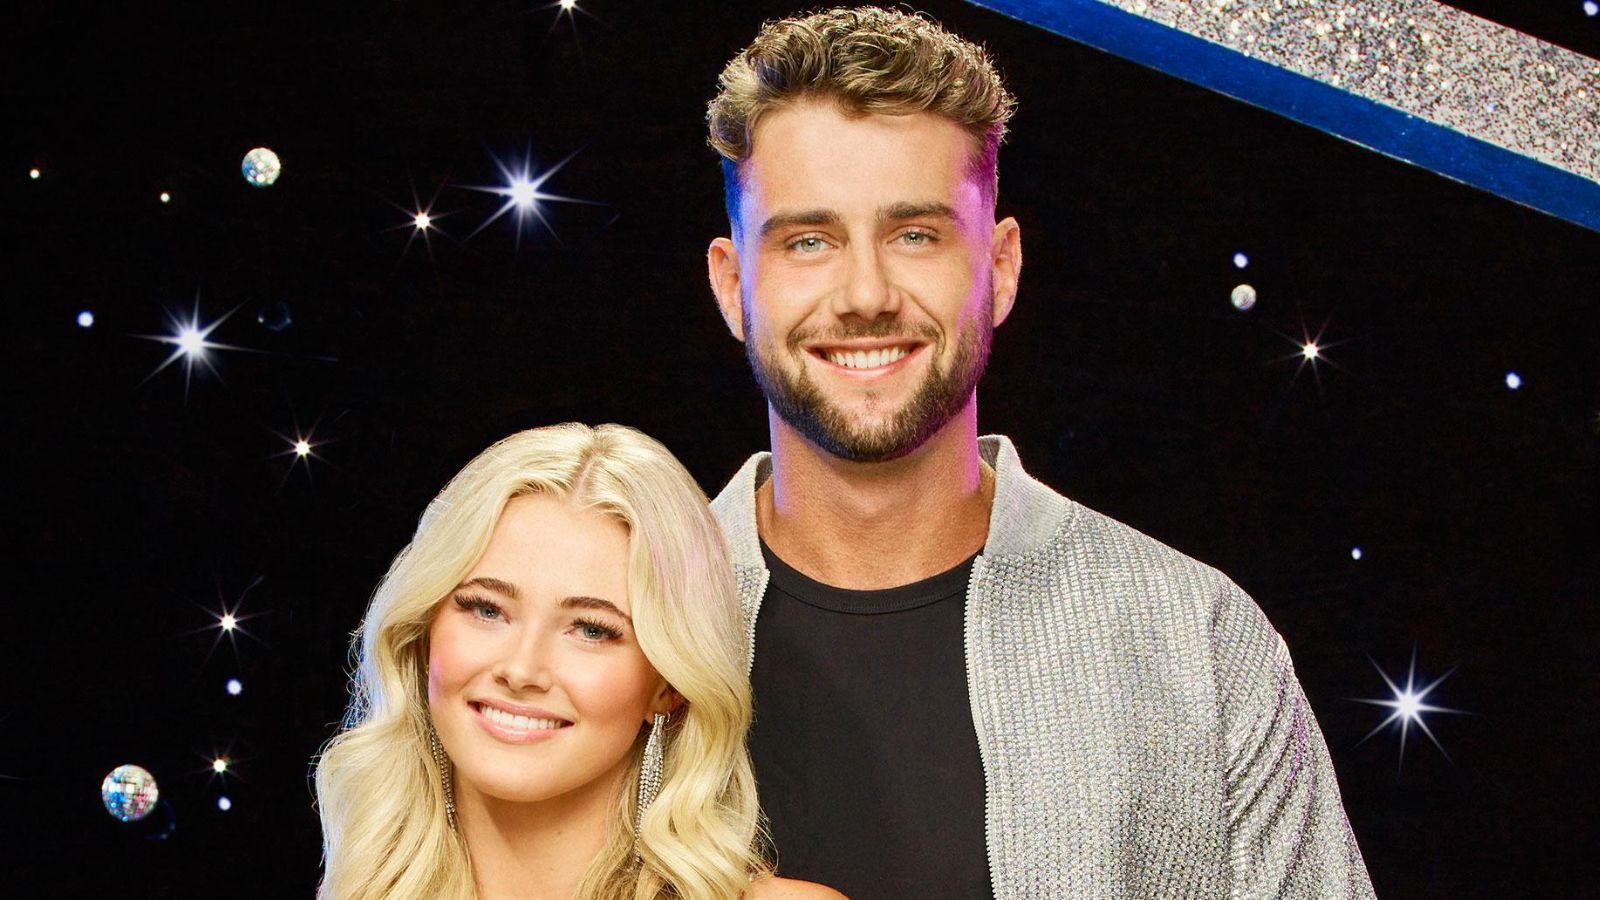 Dancing With The Stars fans convinced Harry Jowsey is dating his dance